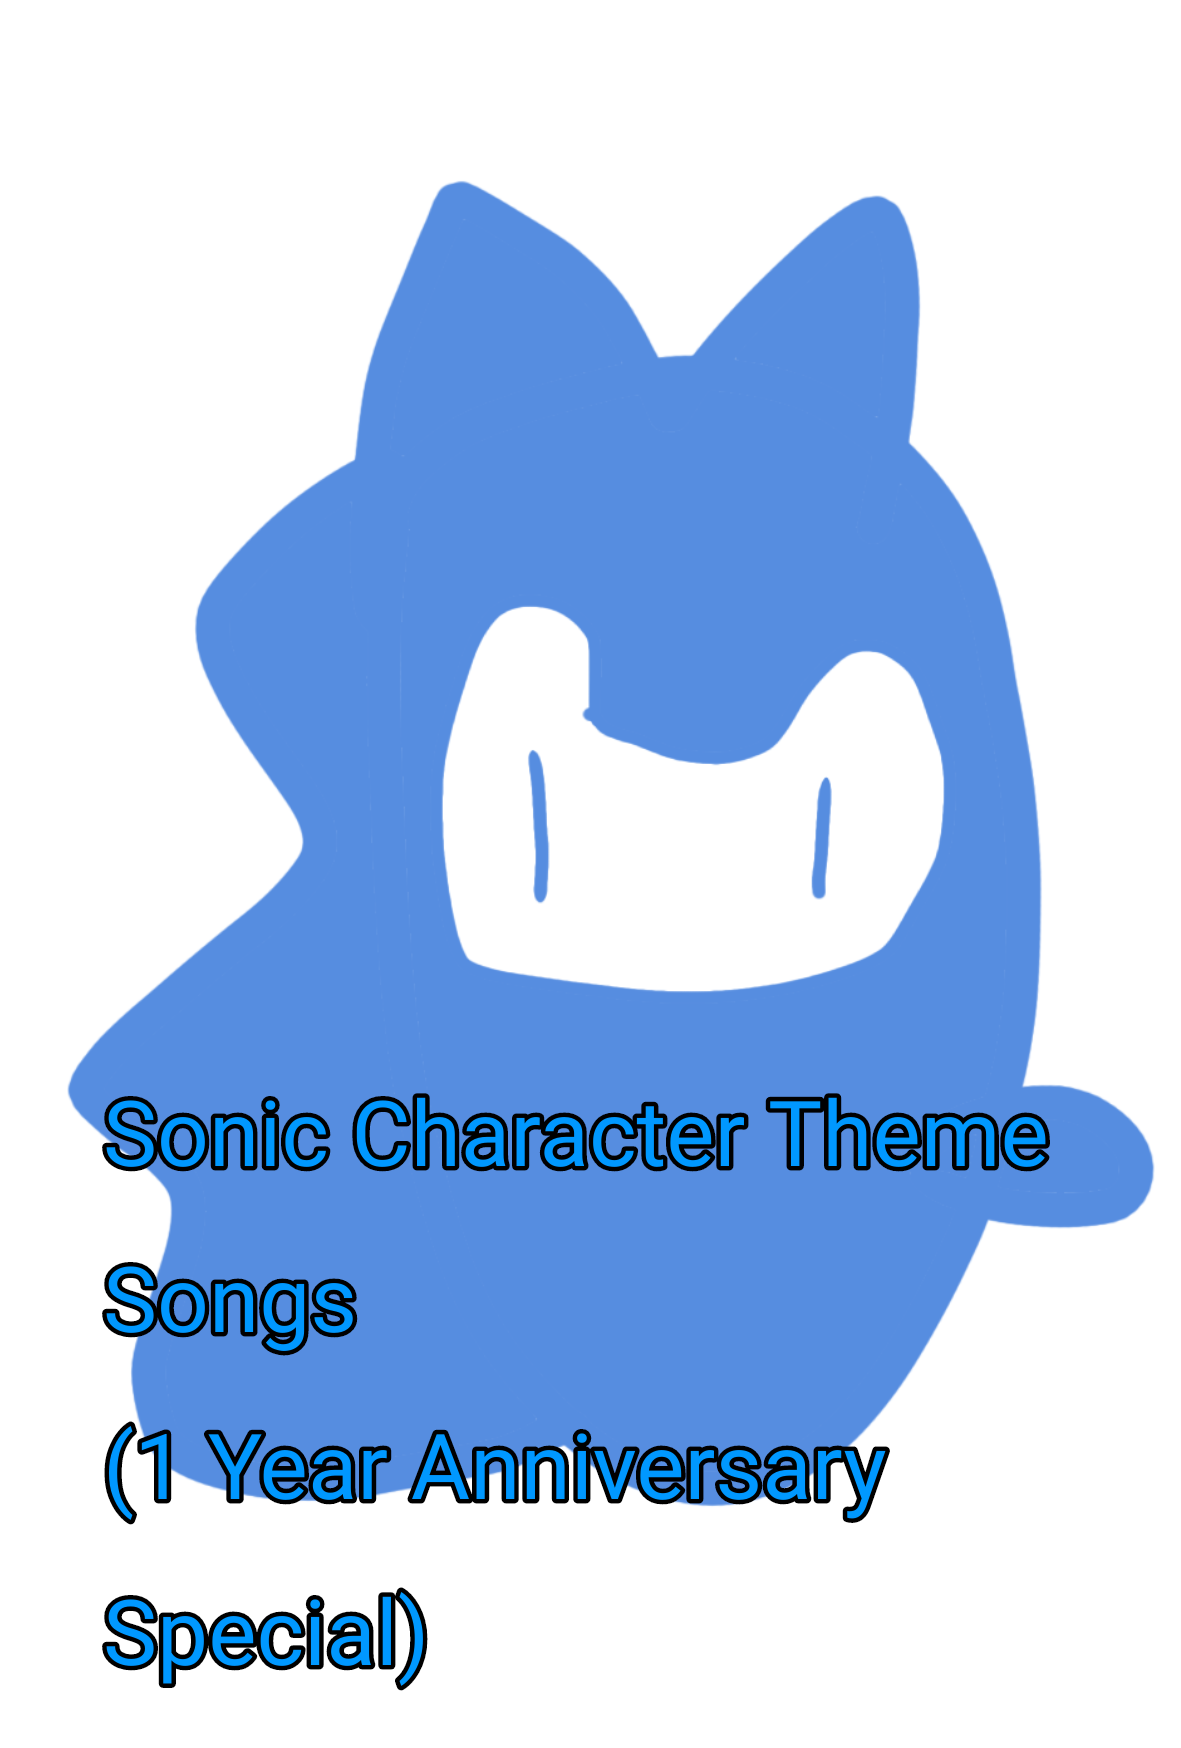 What's your opinion about Majin Sonic? : r/SonicTheHedgehog